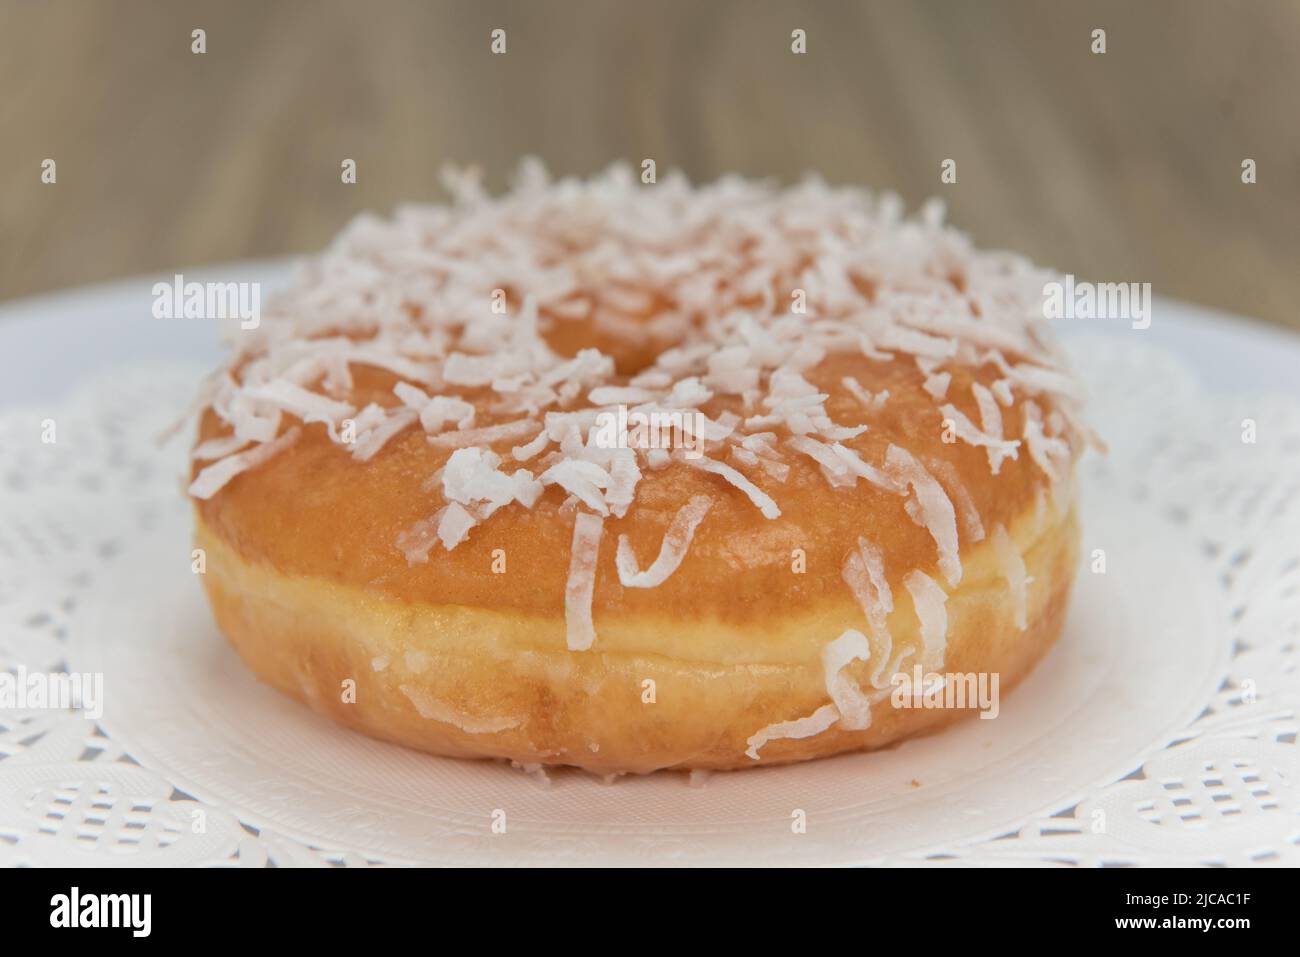 Tempting fresh from the oven coconut glazed donut from the bakery served on a plate. Stock Photo